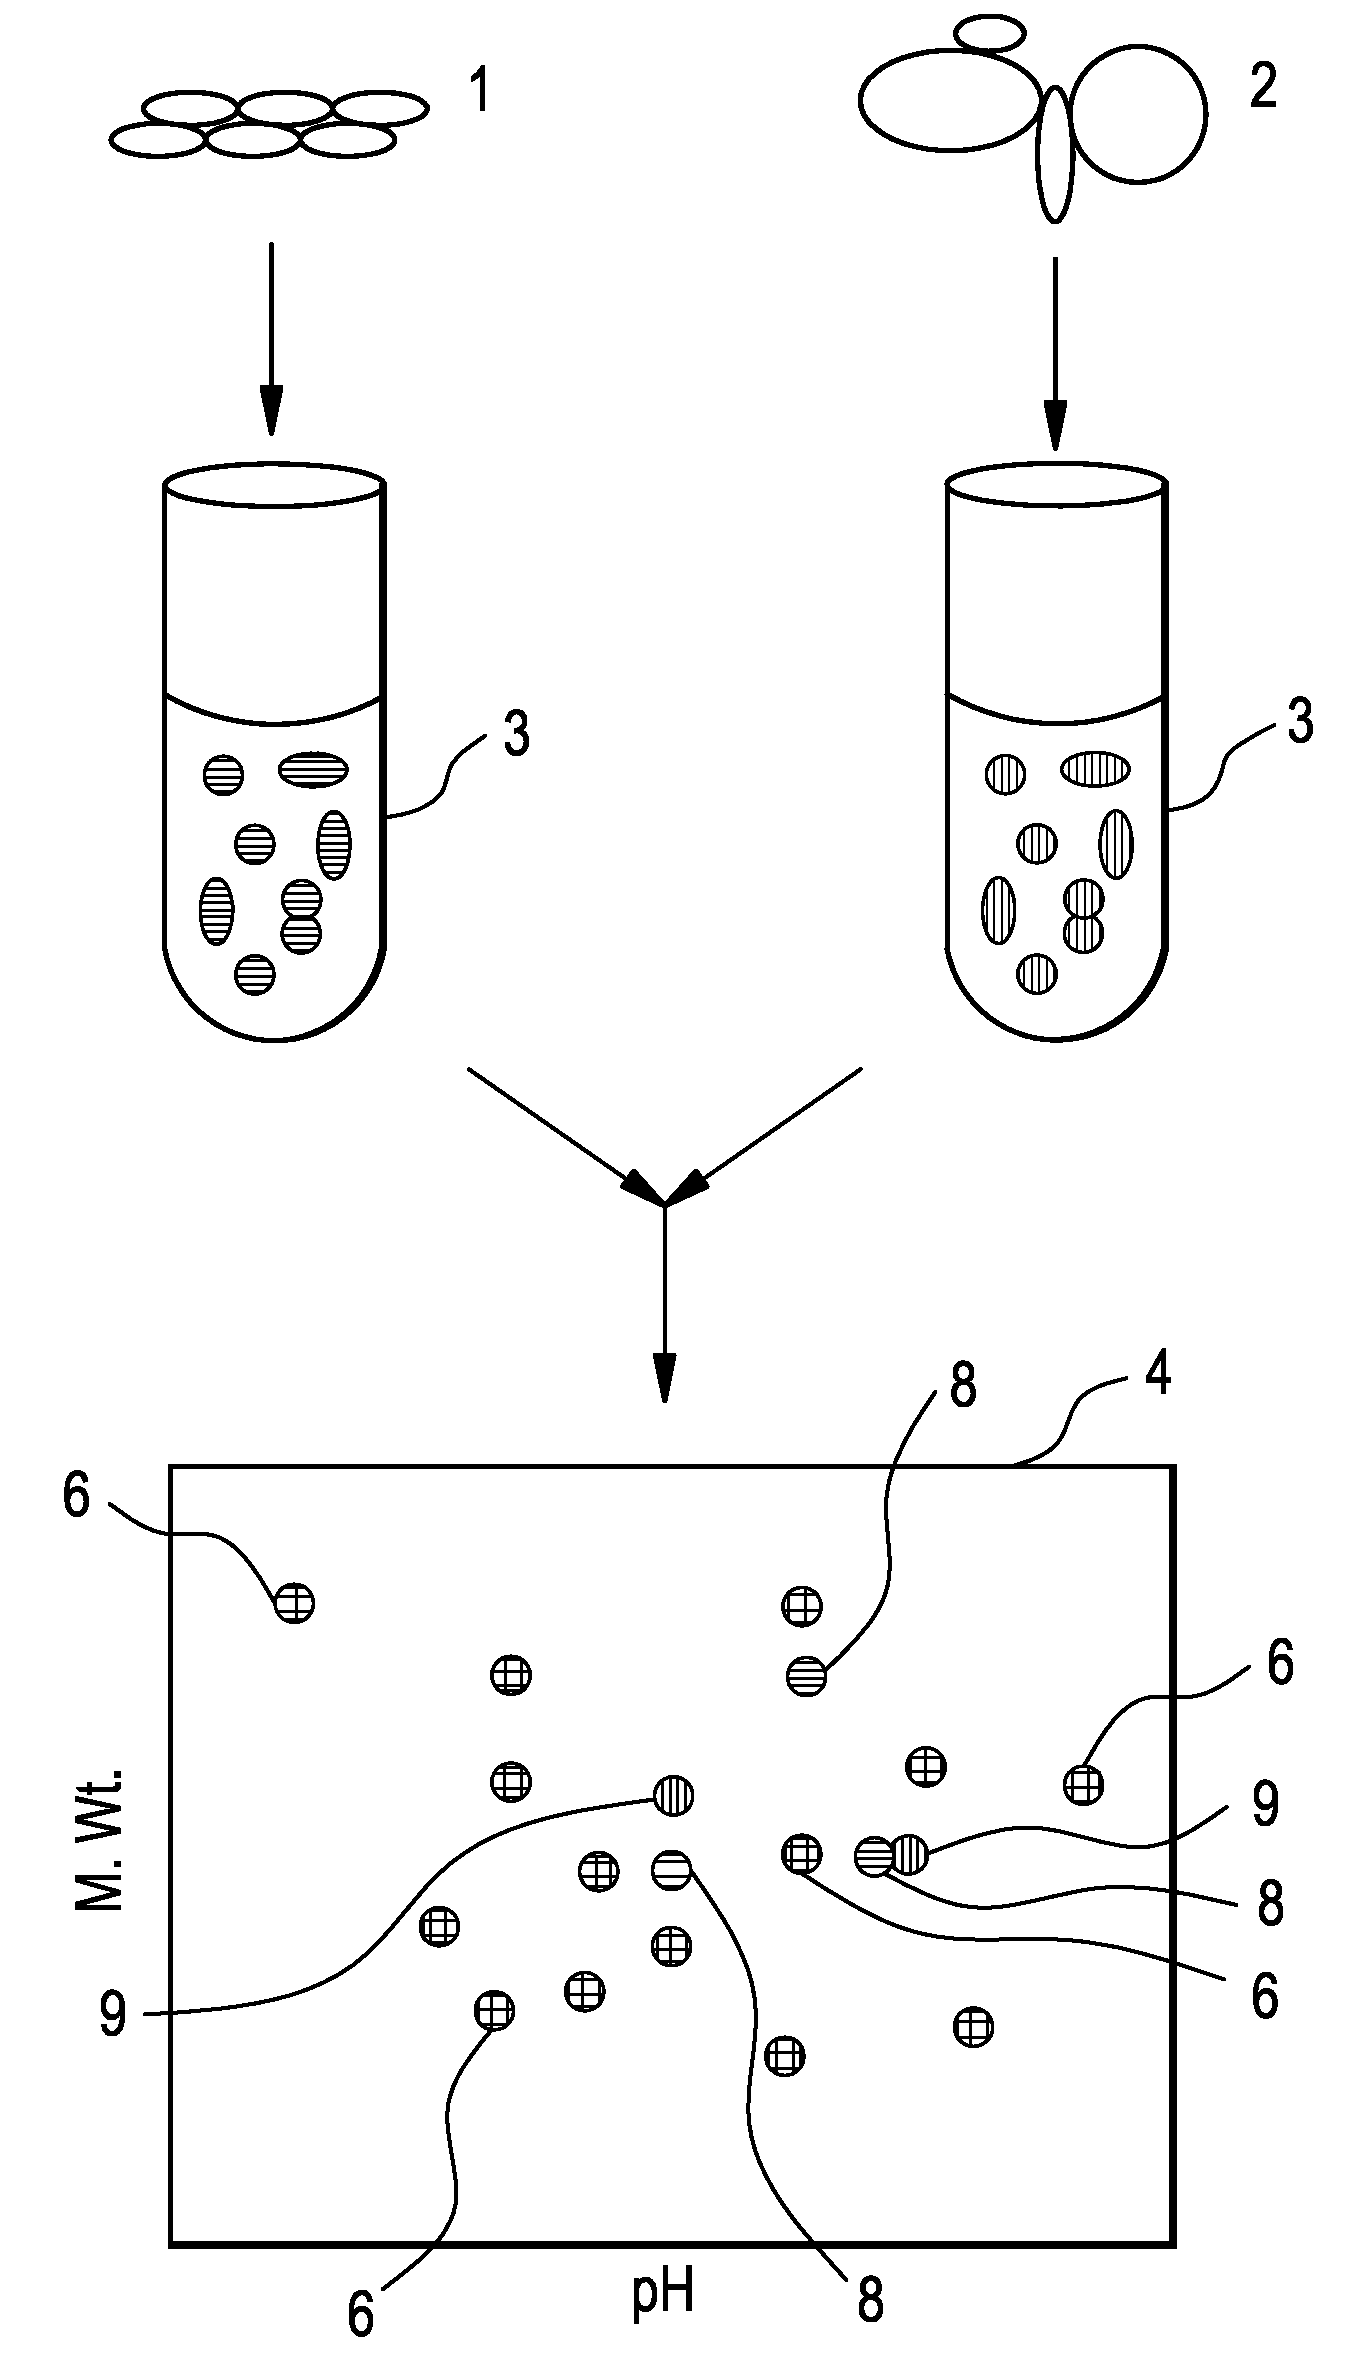 Method of analysing cell samples, by creating and analysing a resultant image